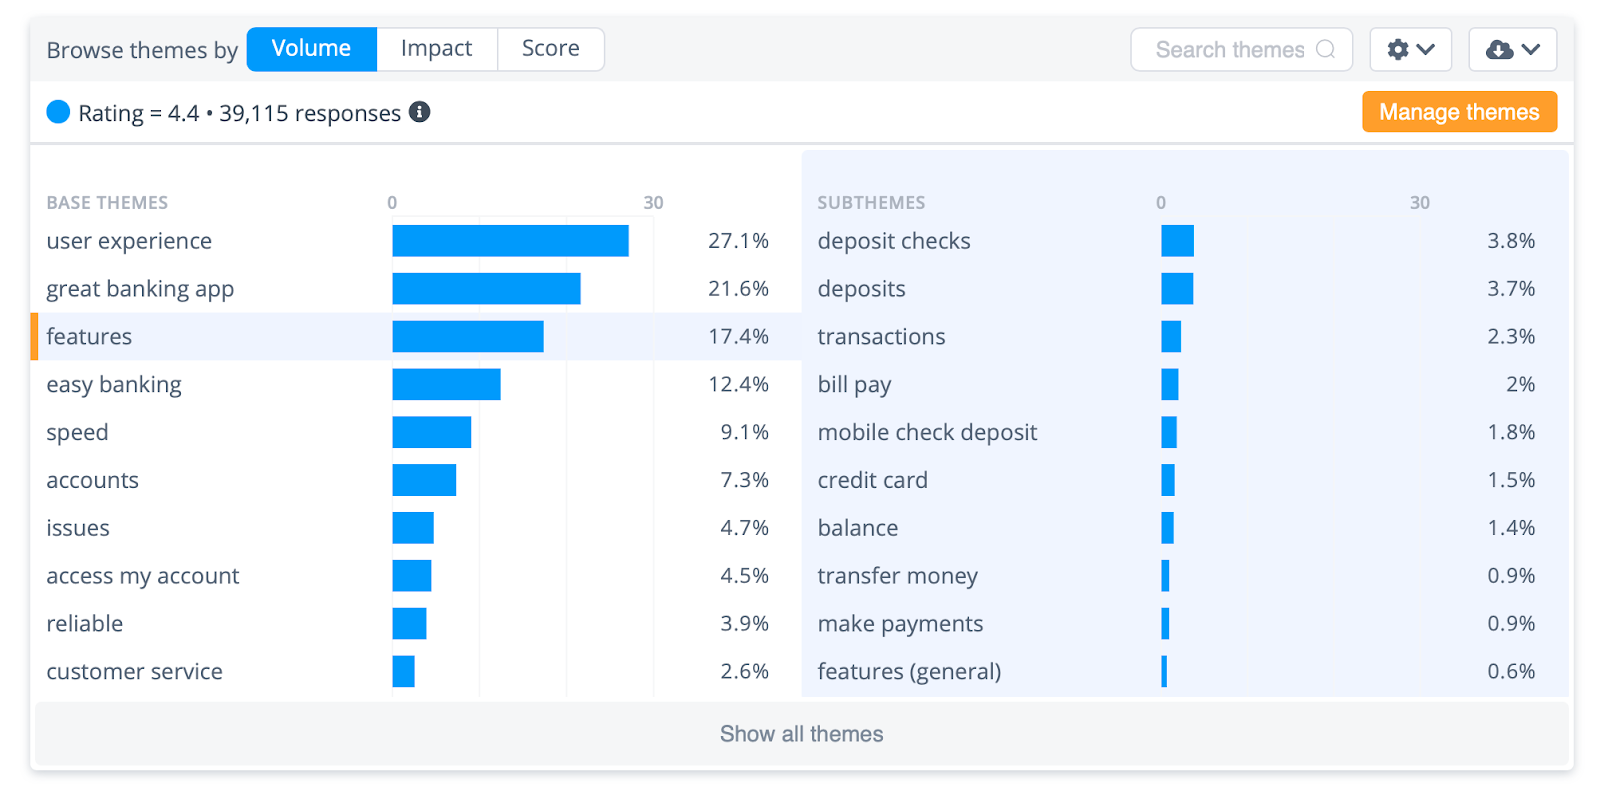 This shows what people are mentioning most in their feedback. Within the “features” theme, the most common theme is about depositing checks.